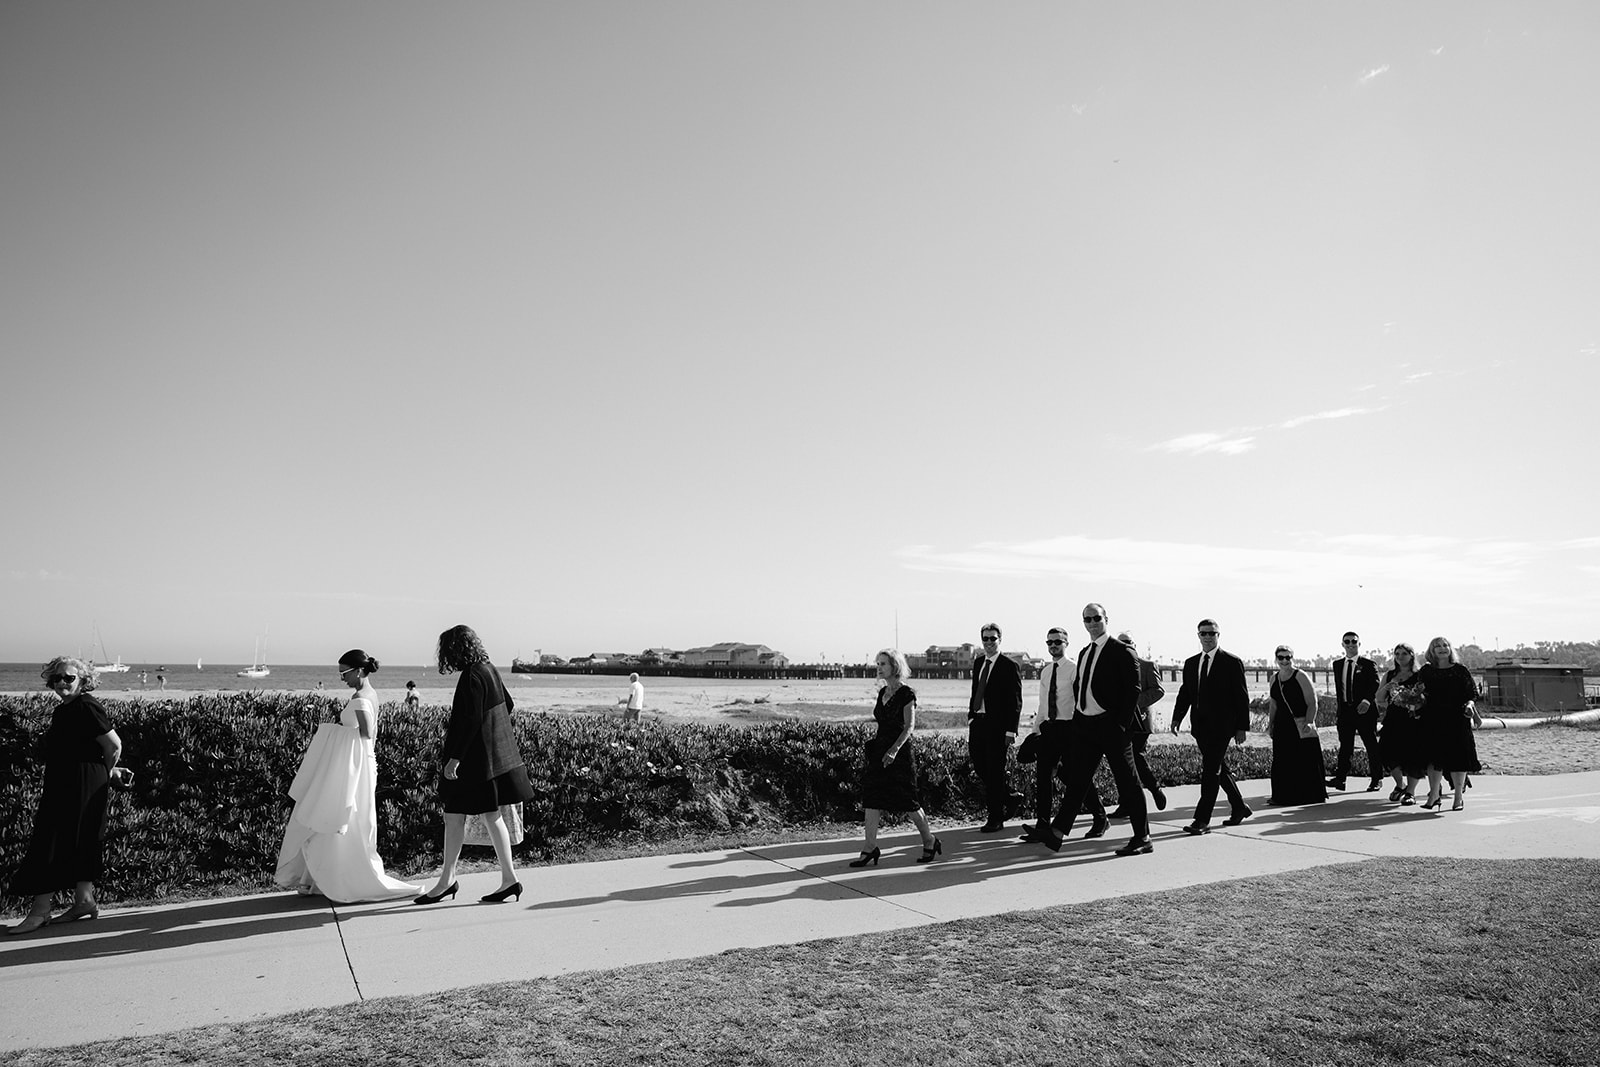 Wedding party walking to the beach after an intimate Santa Barbara Courthouse ceremony.